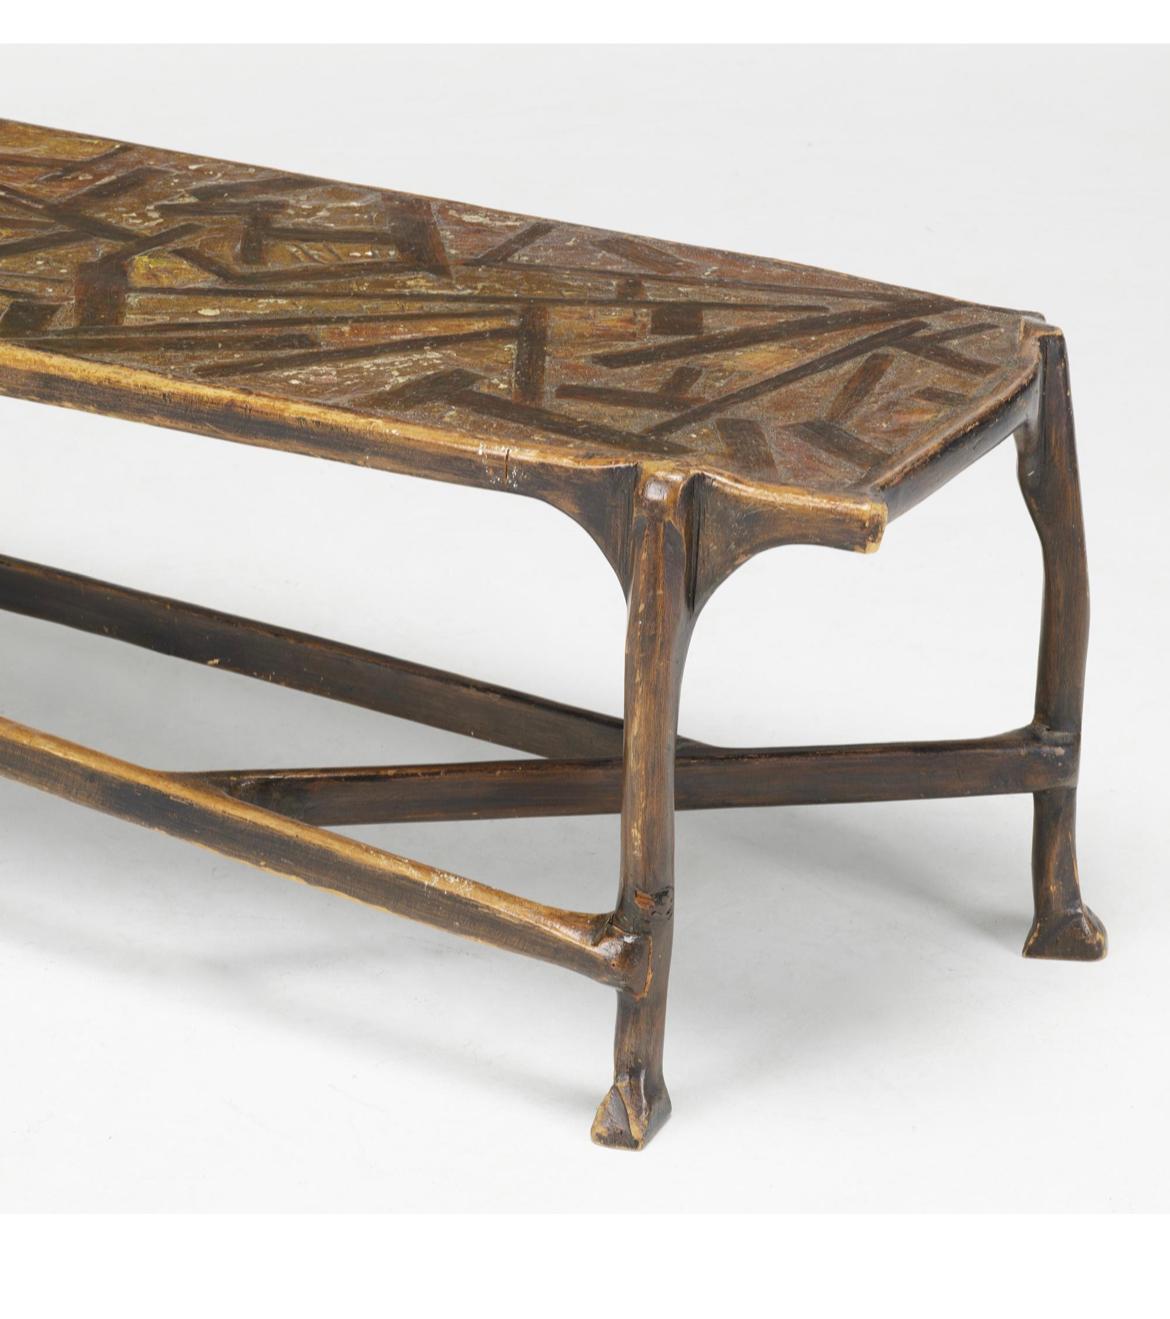 American Midcentury Sculpted Wood Coffee Table or Bench by Smokey Tunis For Sale